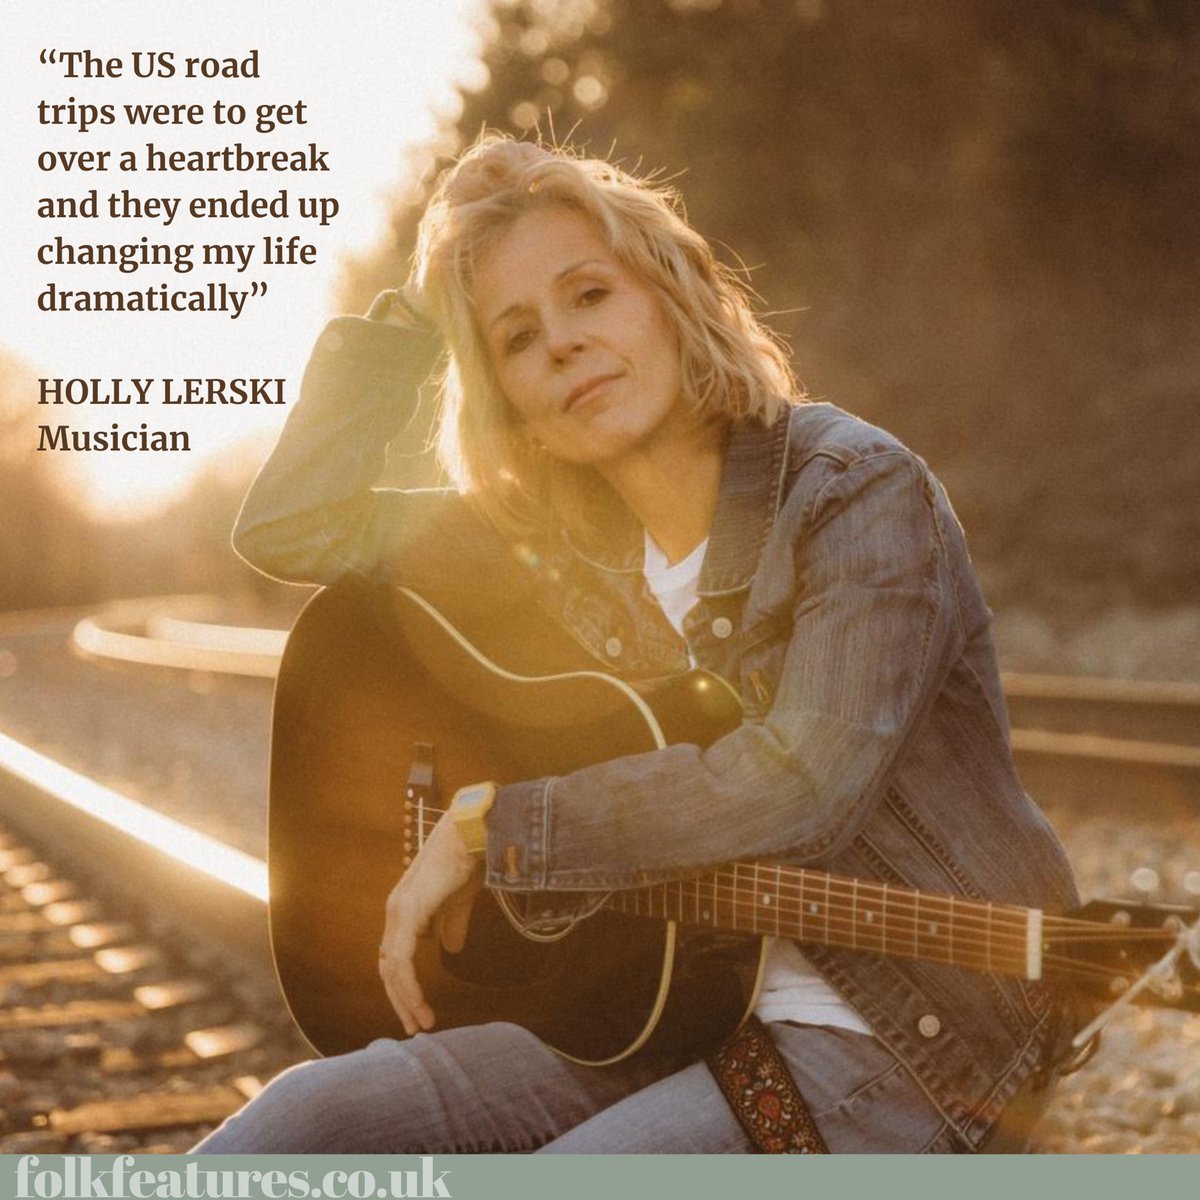 ⭐️ Find out about @HollyLerski’s healing journey from Norfolk to Nashville and back again, ahead of Friday’s album release - ‘Sweet Decline’

folkfeatures.co.uk/hollys-healing…

#Album #Norfolk #folkfeatures #Norwich